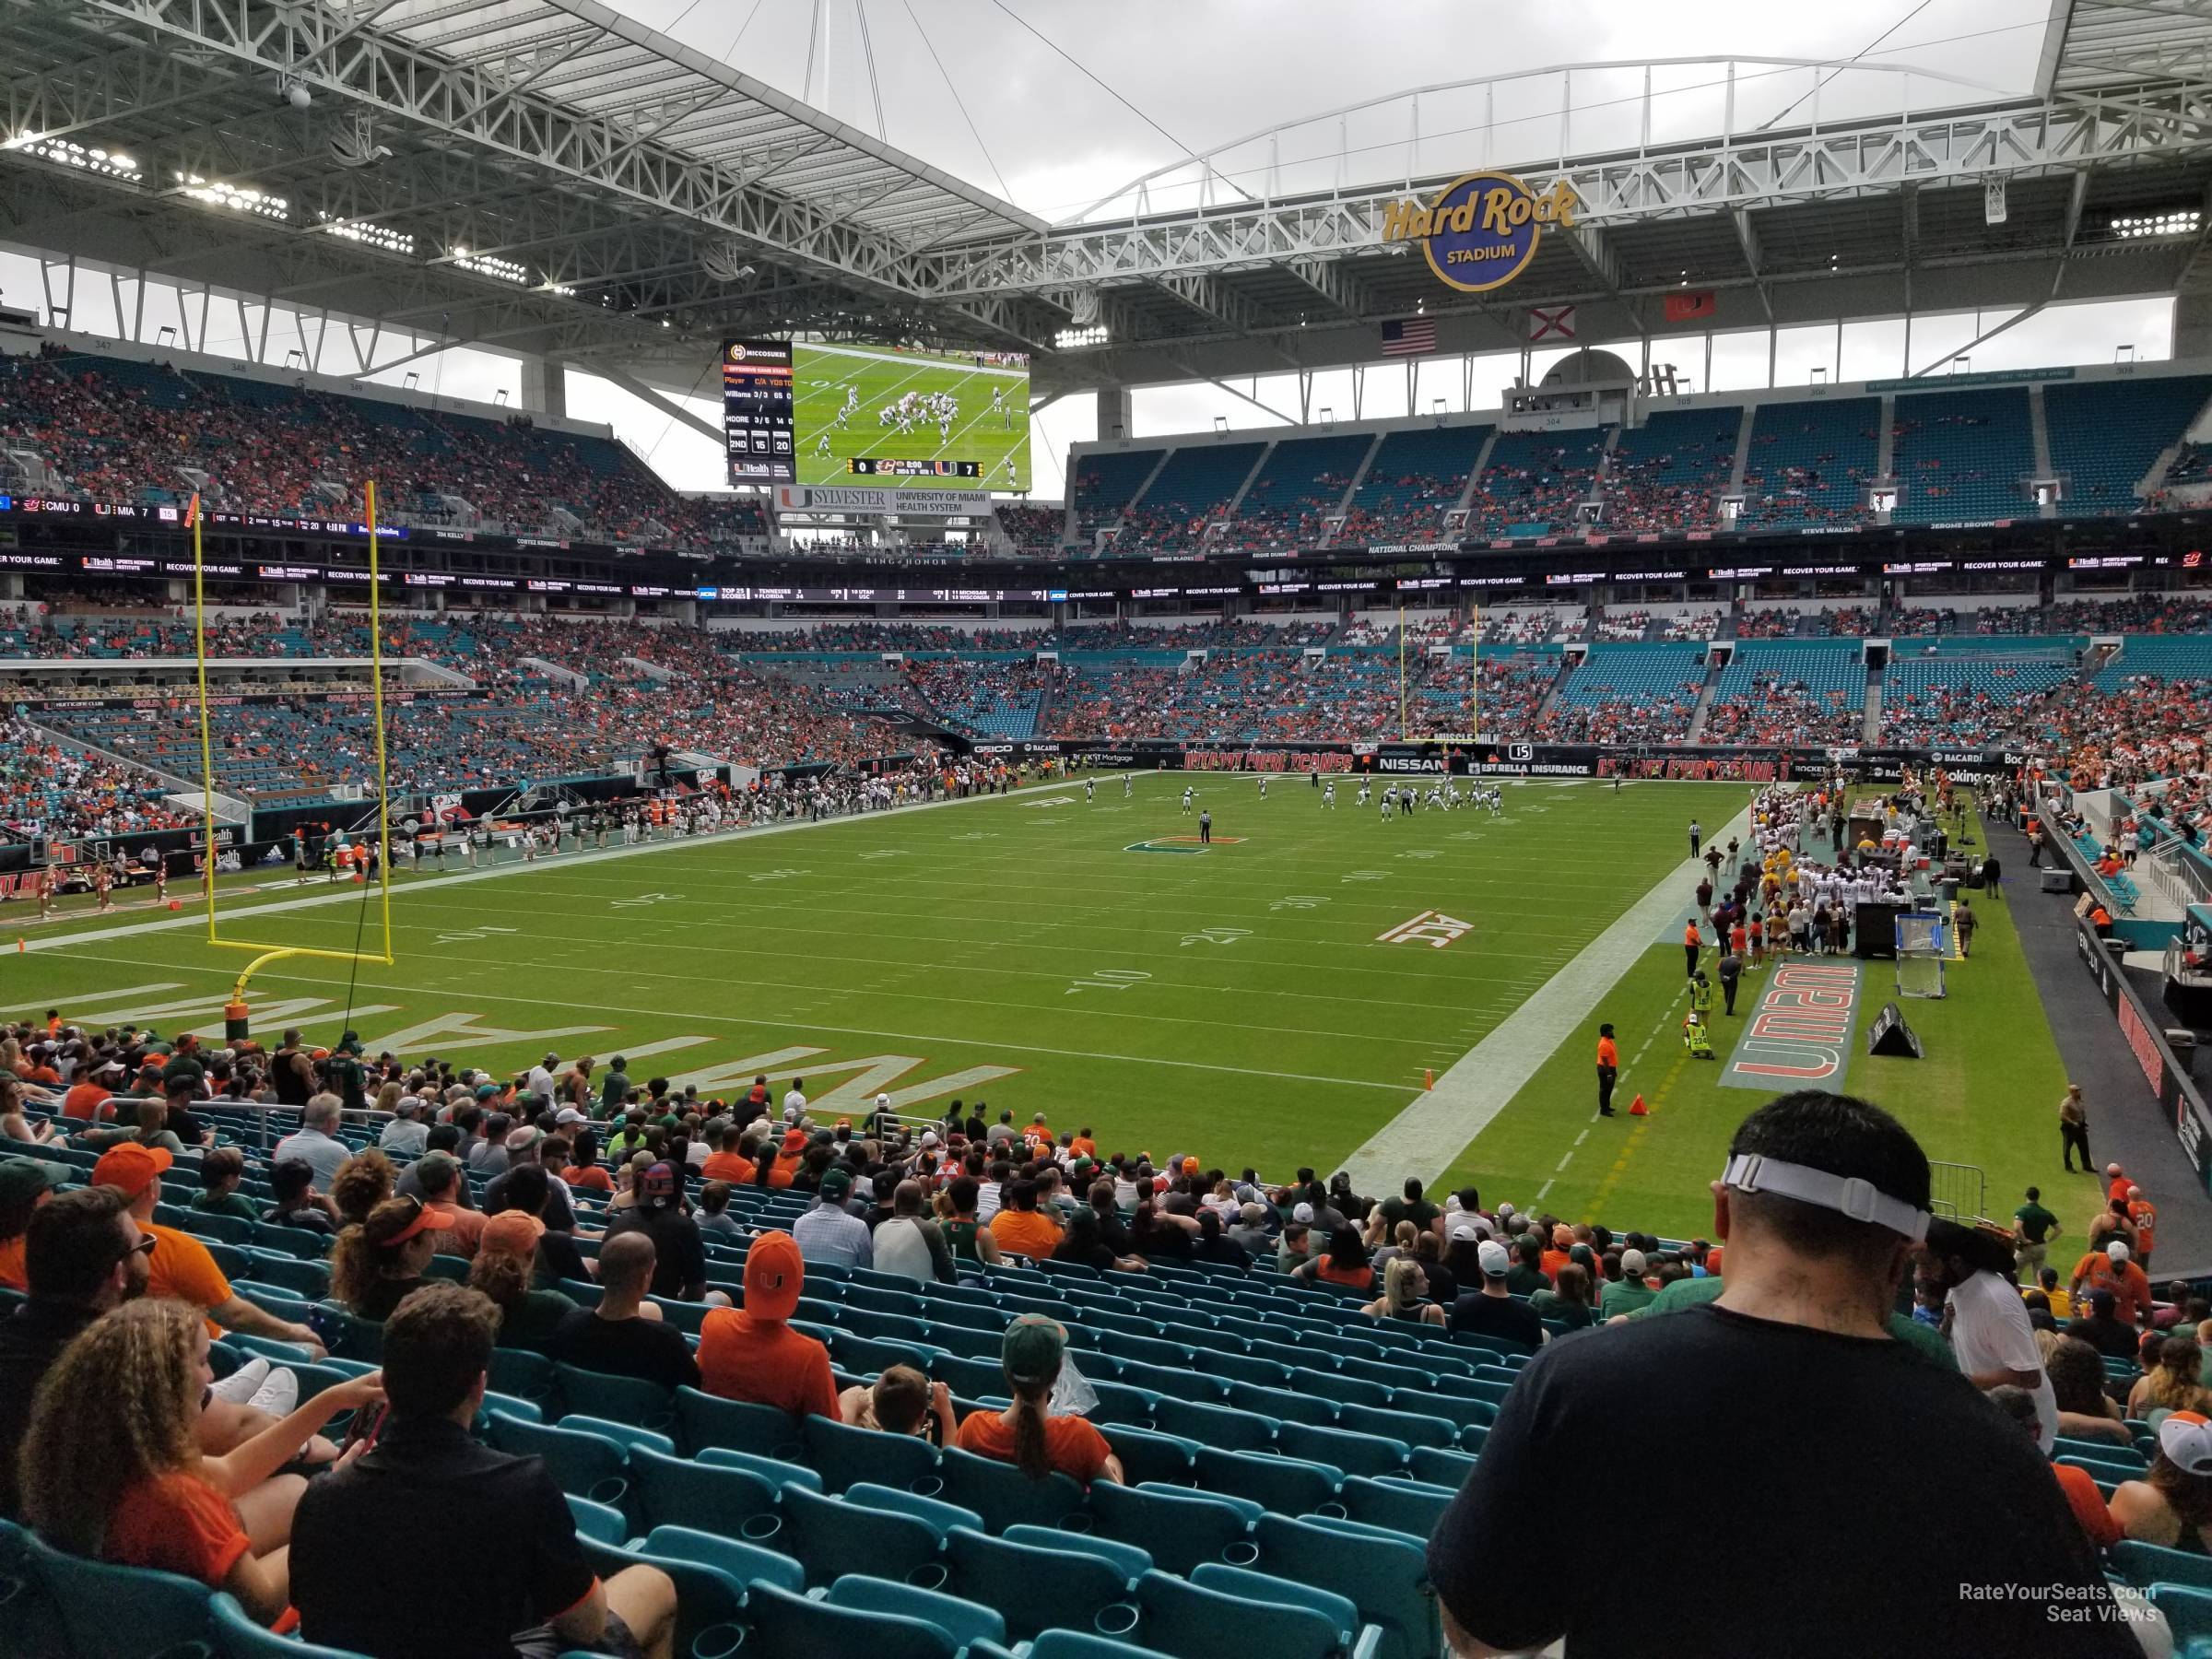 section 129, row 28 seat view  for football - hard rock stadium